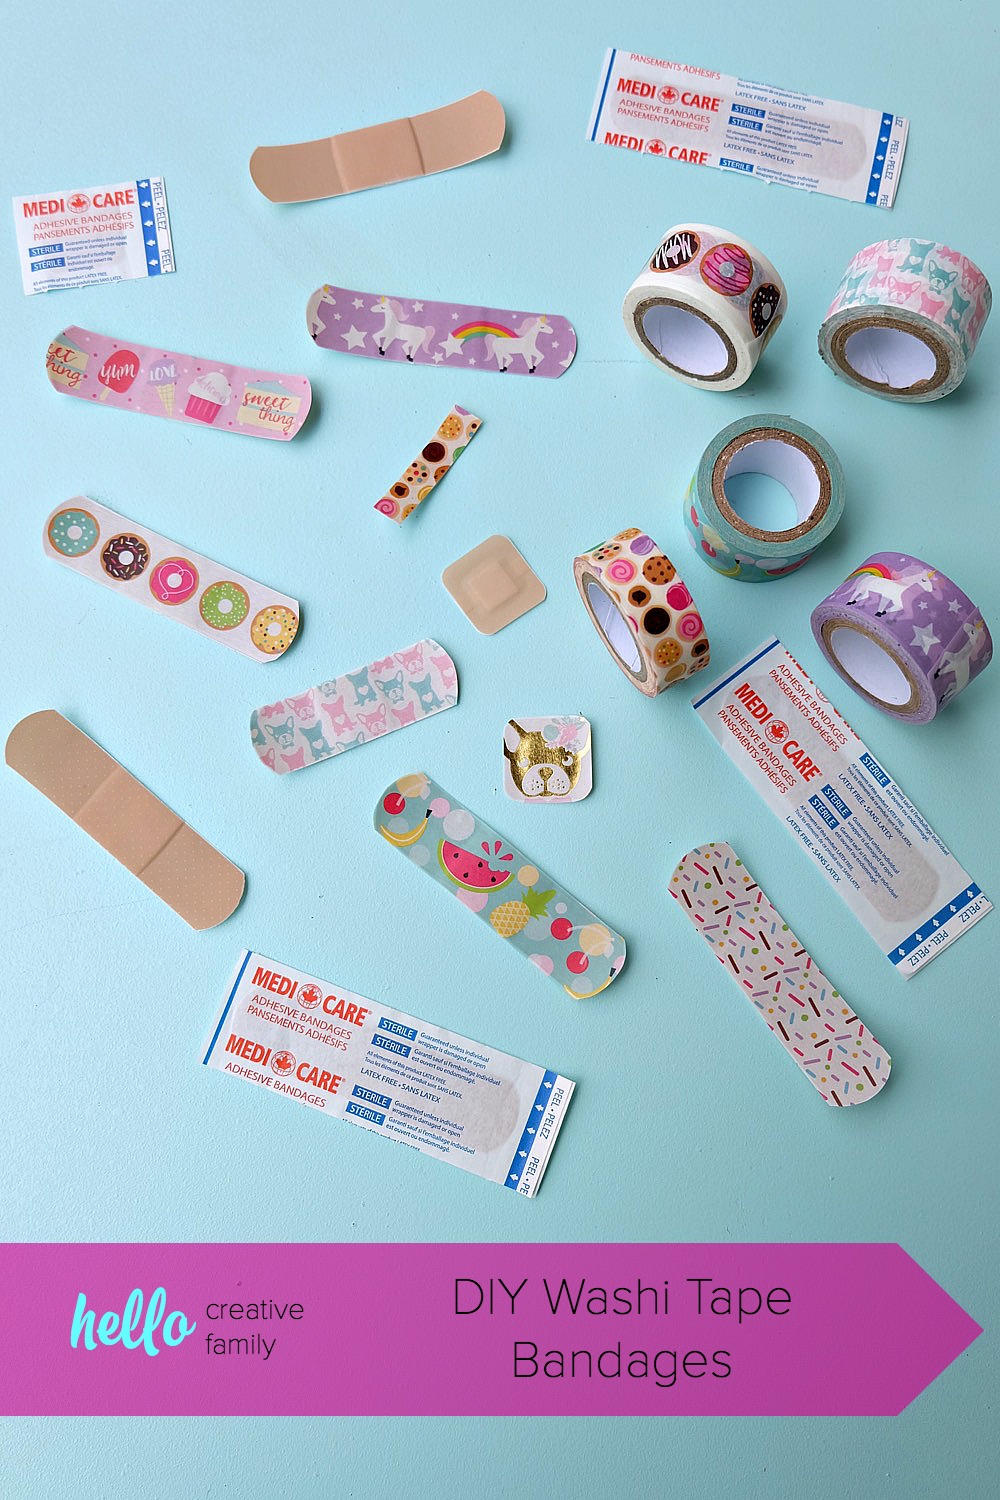 DIY Washi Tape Bandages are so easy to make! All you need is washi tape, scissors and a box of Bandaids! A fun, easy and inexpensive craft project that kids will love! A great activity for craft playdates, or birthday party activities!  Who knew a bandaid could be a cute fashion accessory? #washitape #crafts #diy